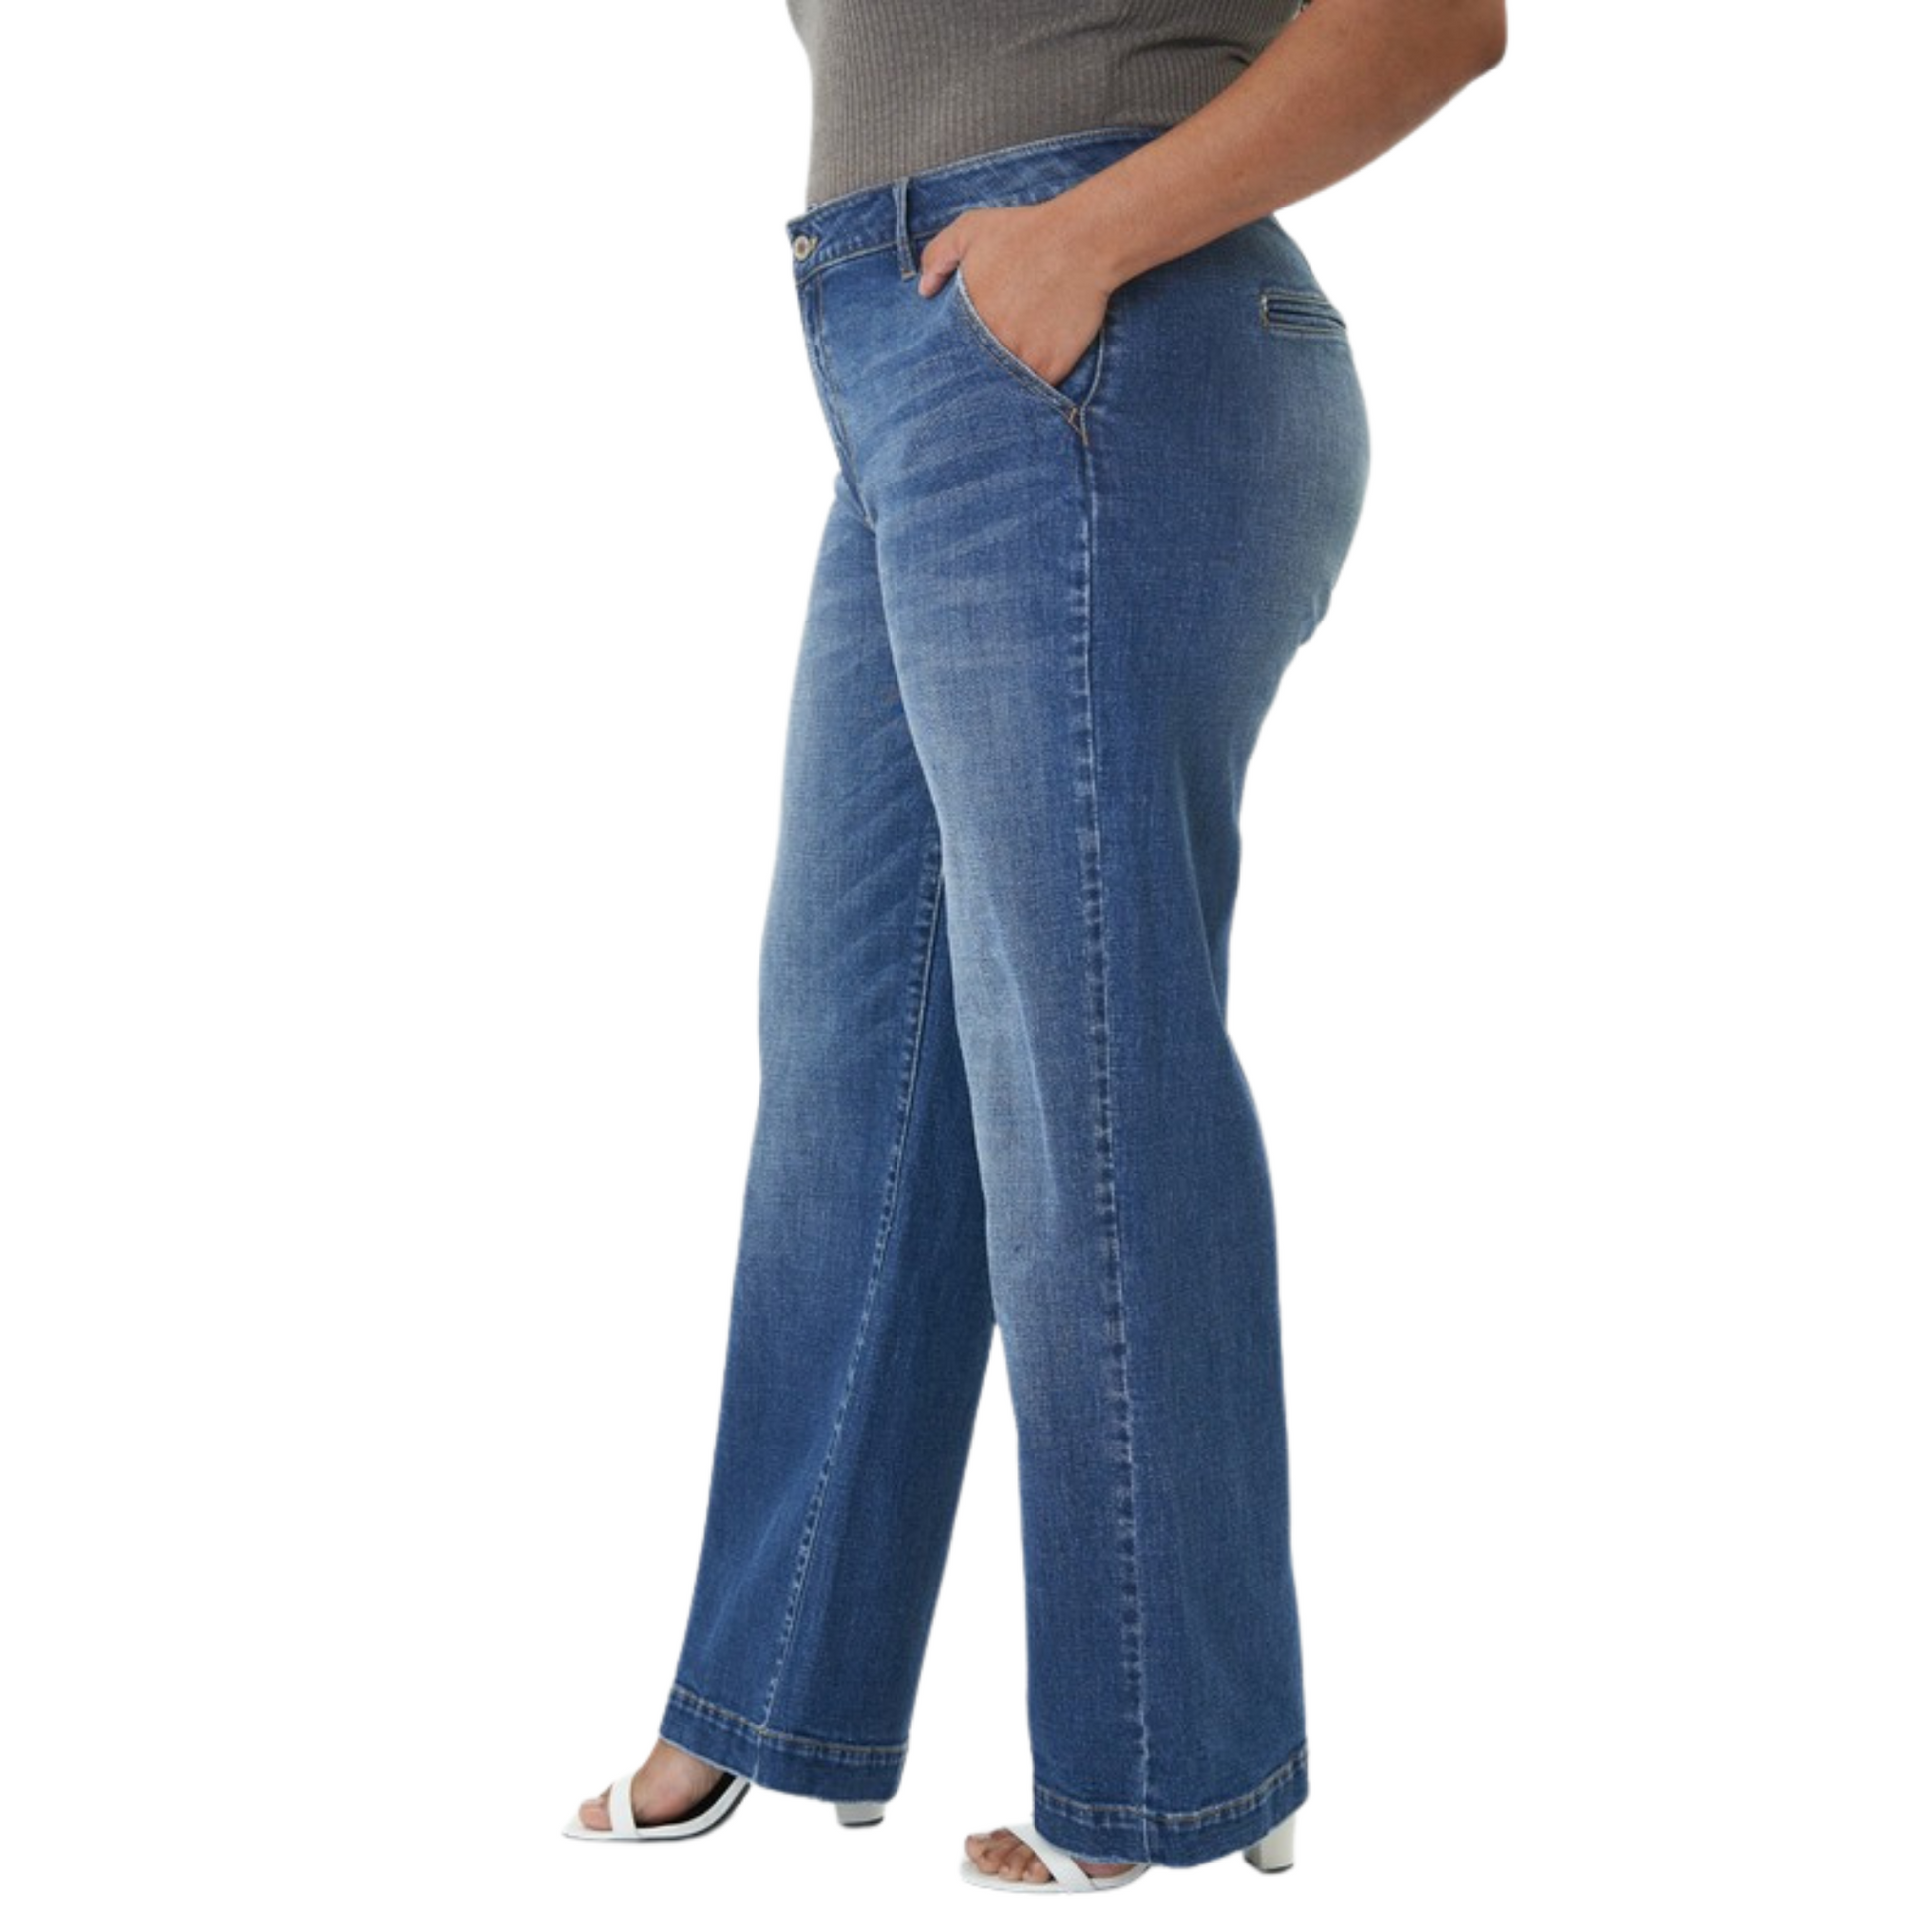 Our High-Rise Wide Leg Jeans are designed for a timeless look and timeless feel. The medium wash provides a retro twist that will be sure to stand out. Featuring a flattering high-rise fit and fashionable wide leg, these jeans are the perfect choice for any wardrobe.